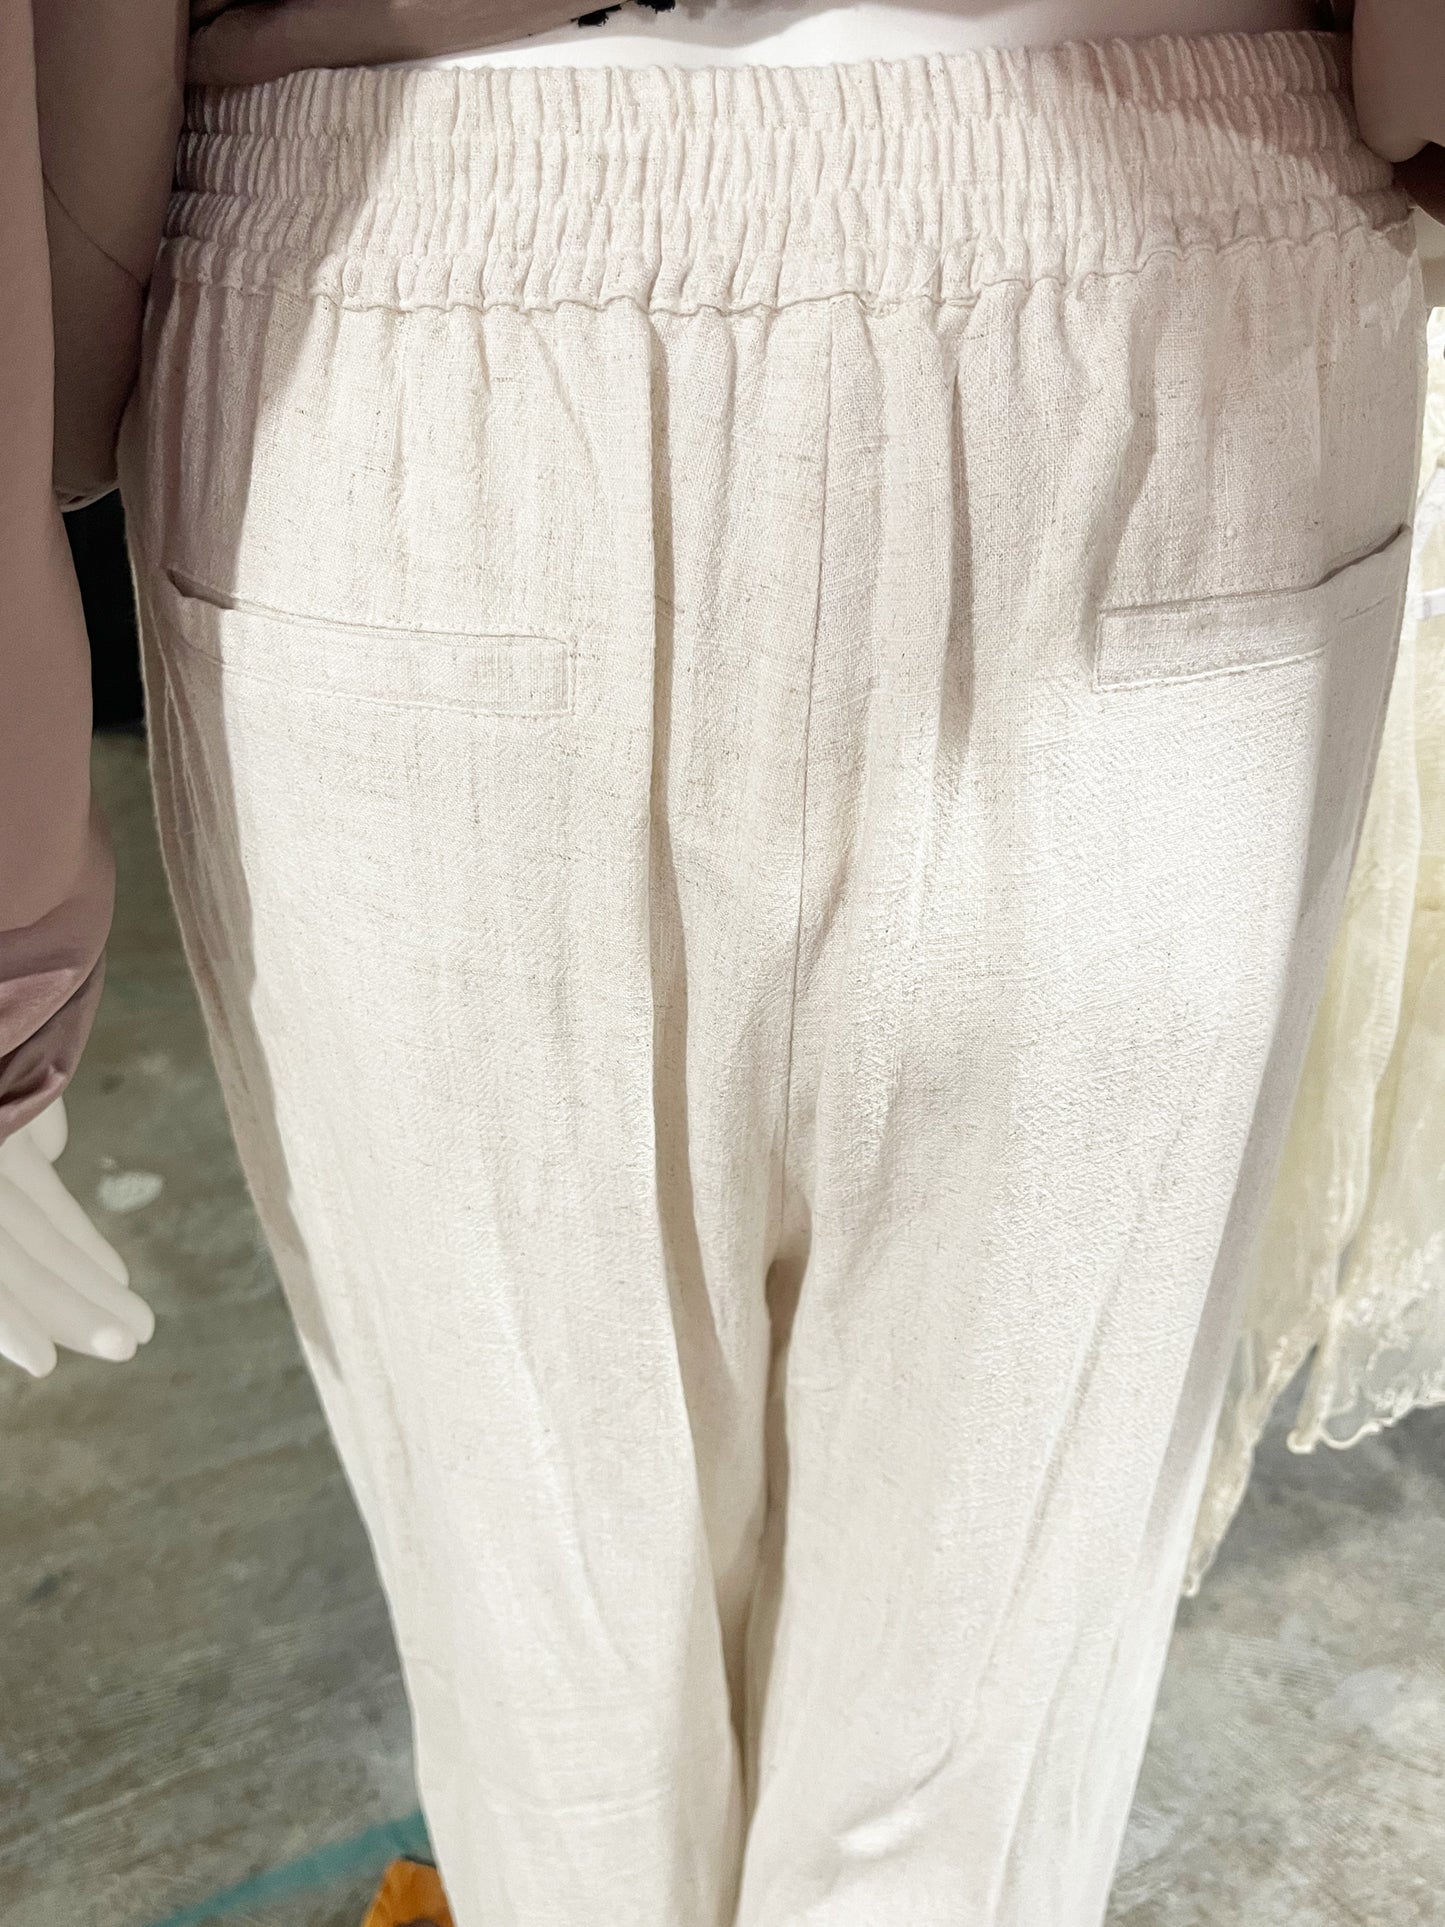 Classic is the new fabulous with these perfect oatmeal linen look slacks by Kori. So comfy and soft with an elastic back waisband, and roomy wide legs that hang perfectly for a flattering fit. Front flap pockets, button closure. Dress up or down, these are office perfect to date night chic. 100% Rayon.